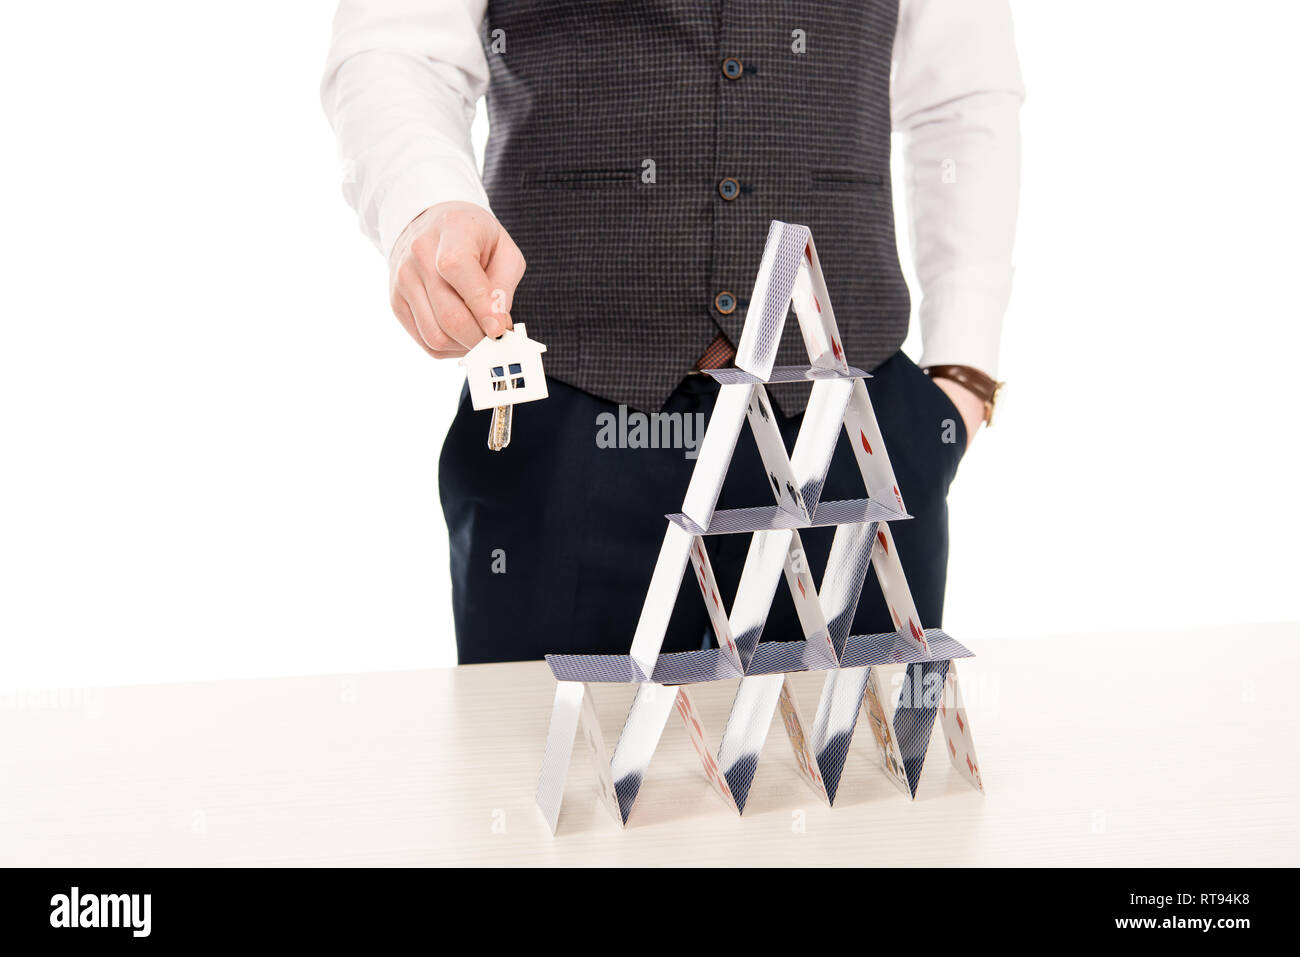 cropped view of realtor holding house keys and showing pyramid from playing cards, isolated on white Stock Photo